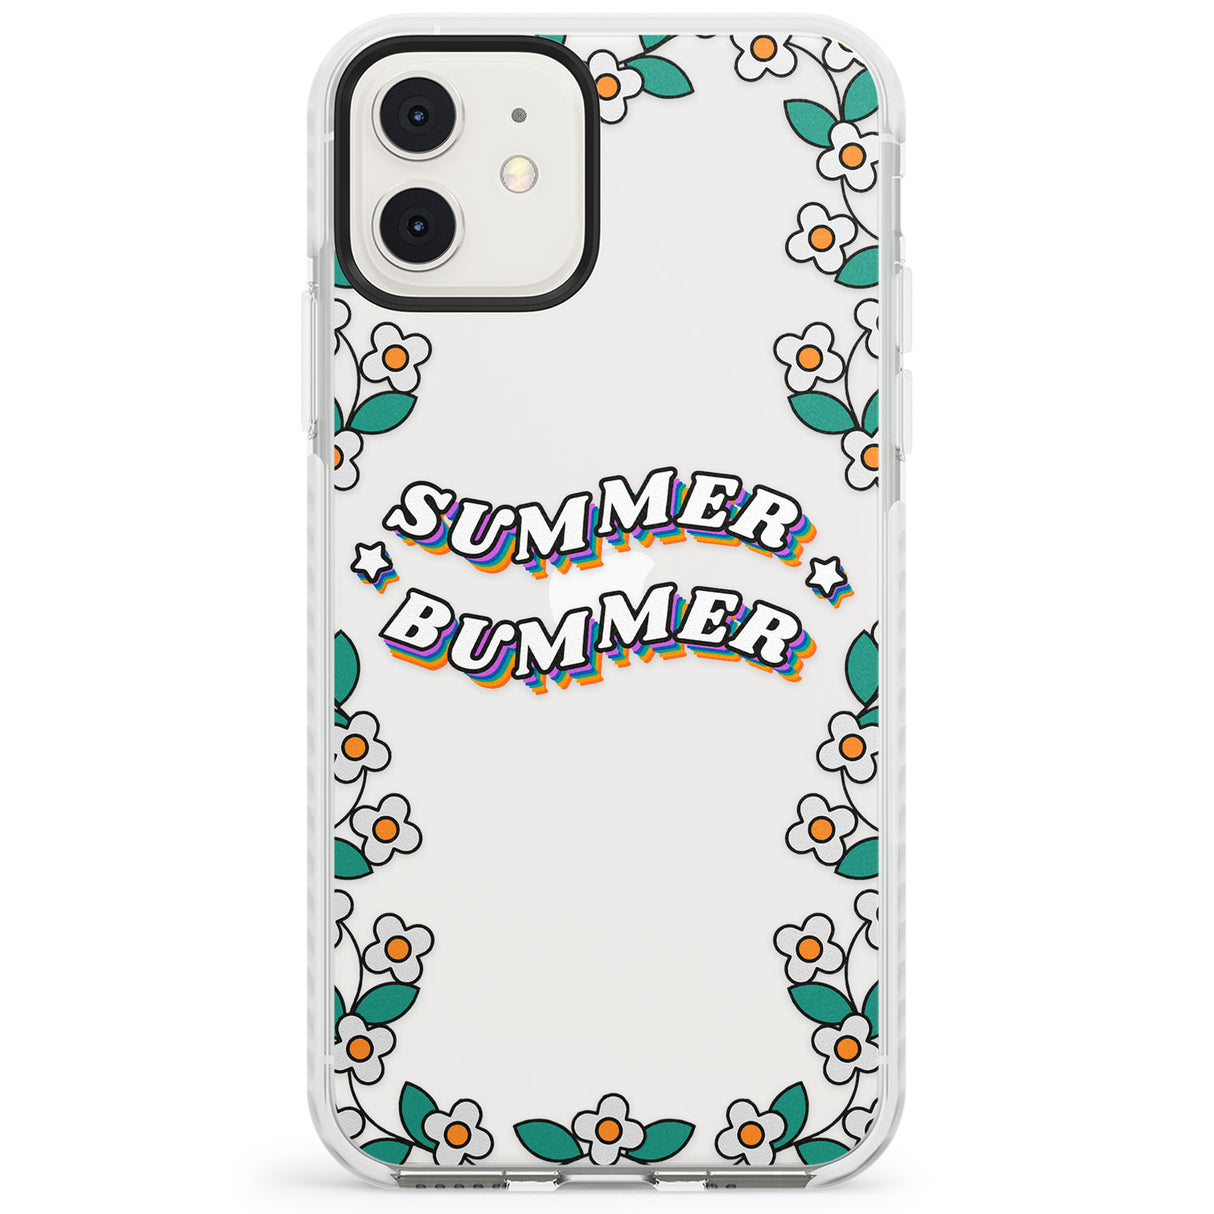 Summer Bummer Impact Phone Case for iPhone 11, iphone 12